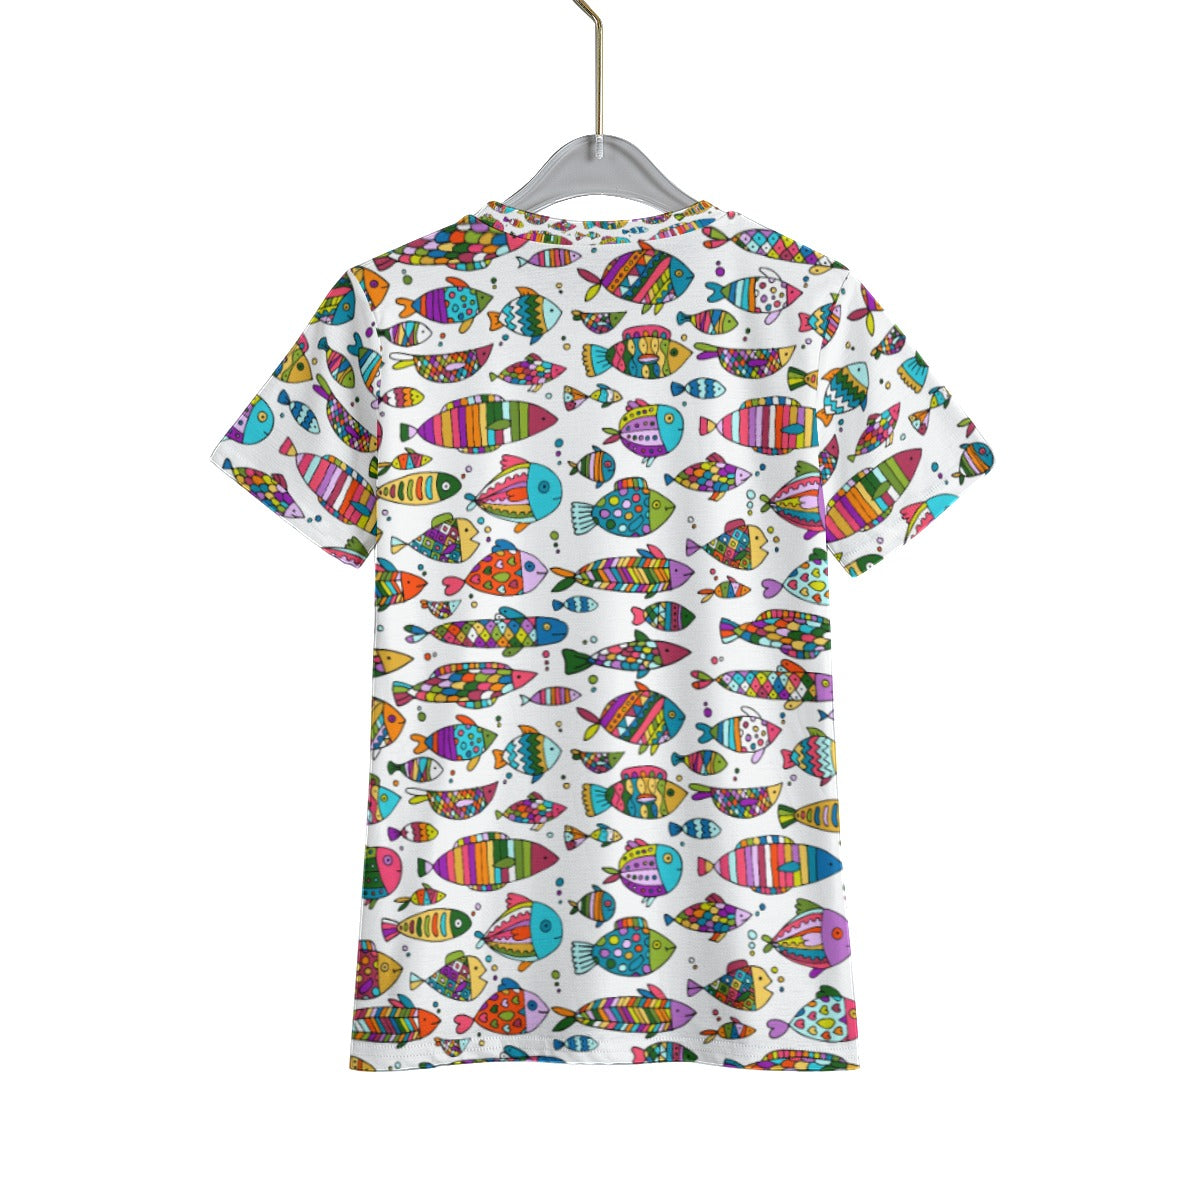 Sea of Peace All-Over Print Kid's T-Shirt